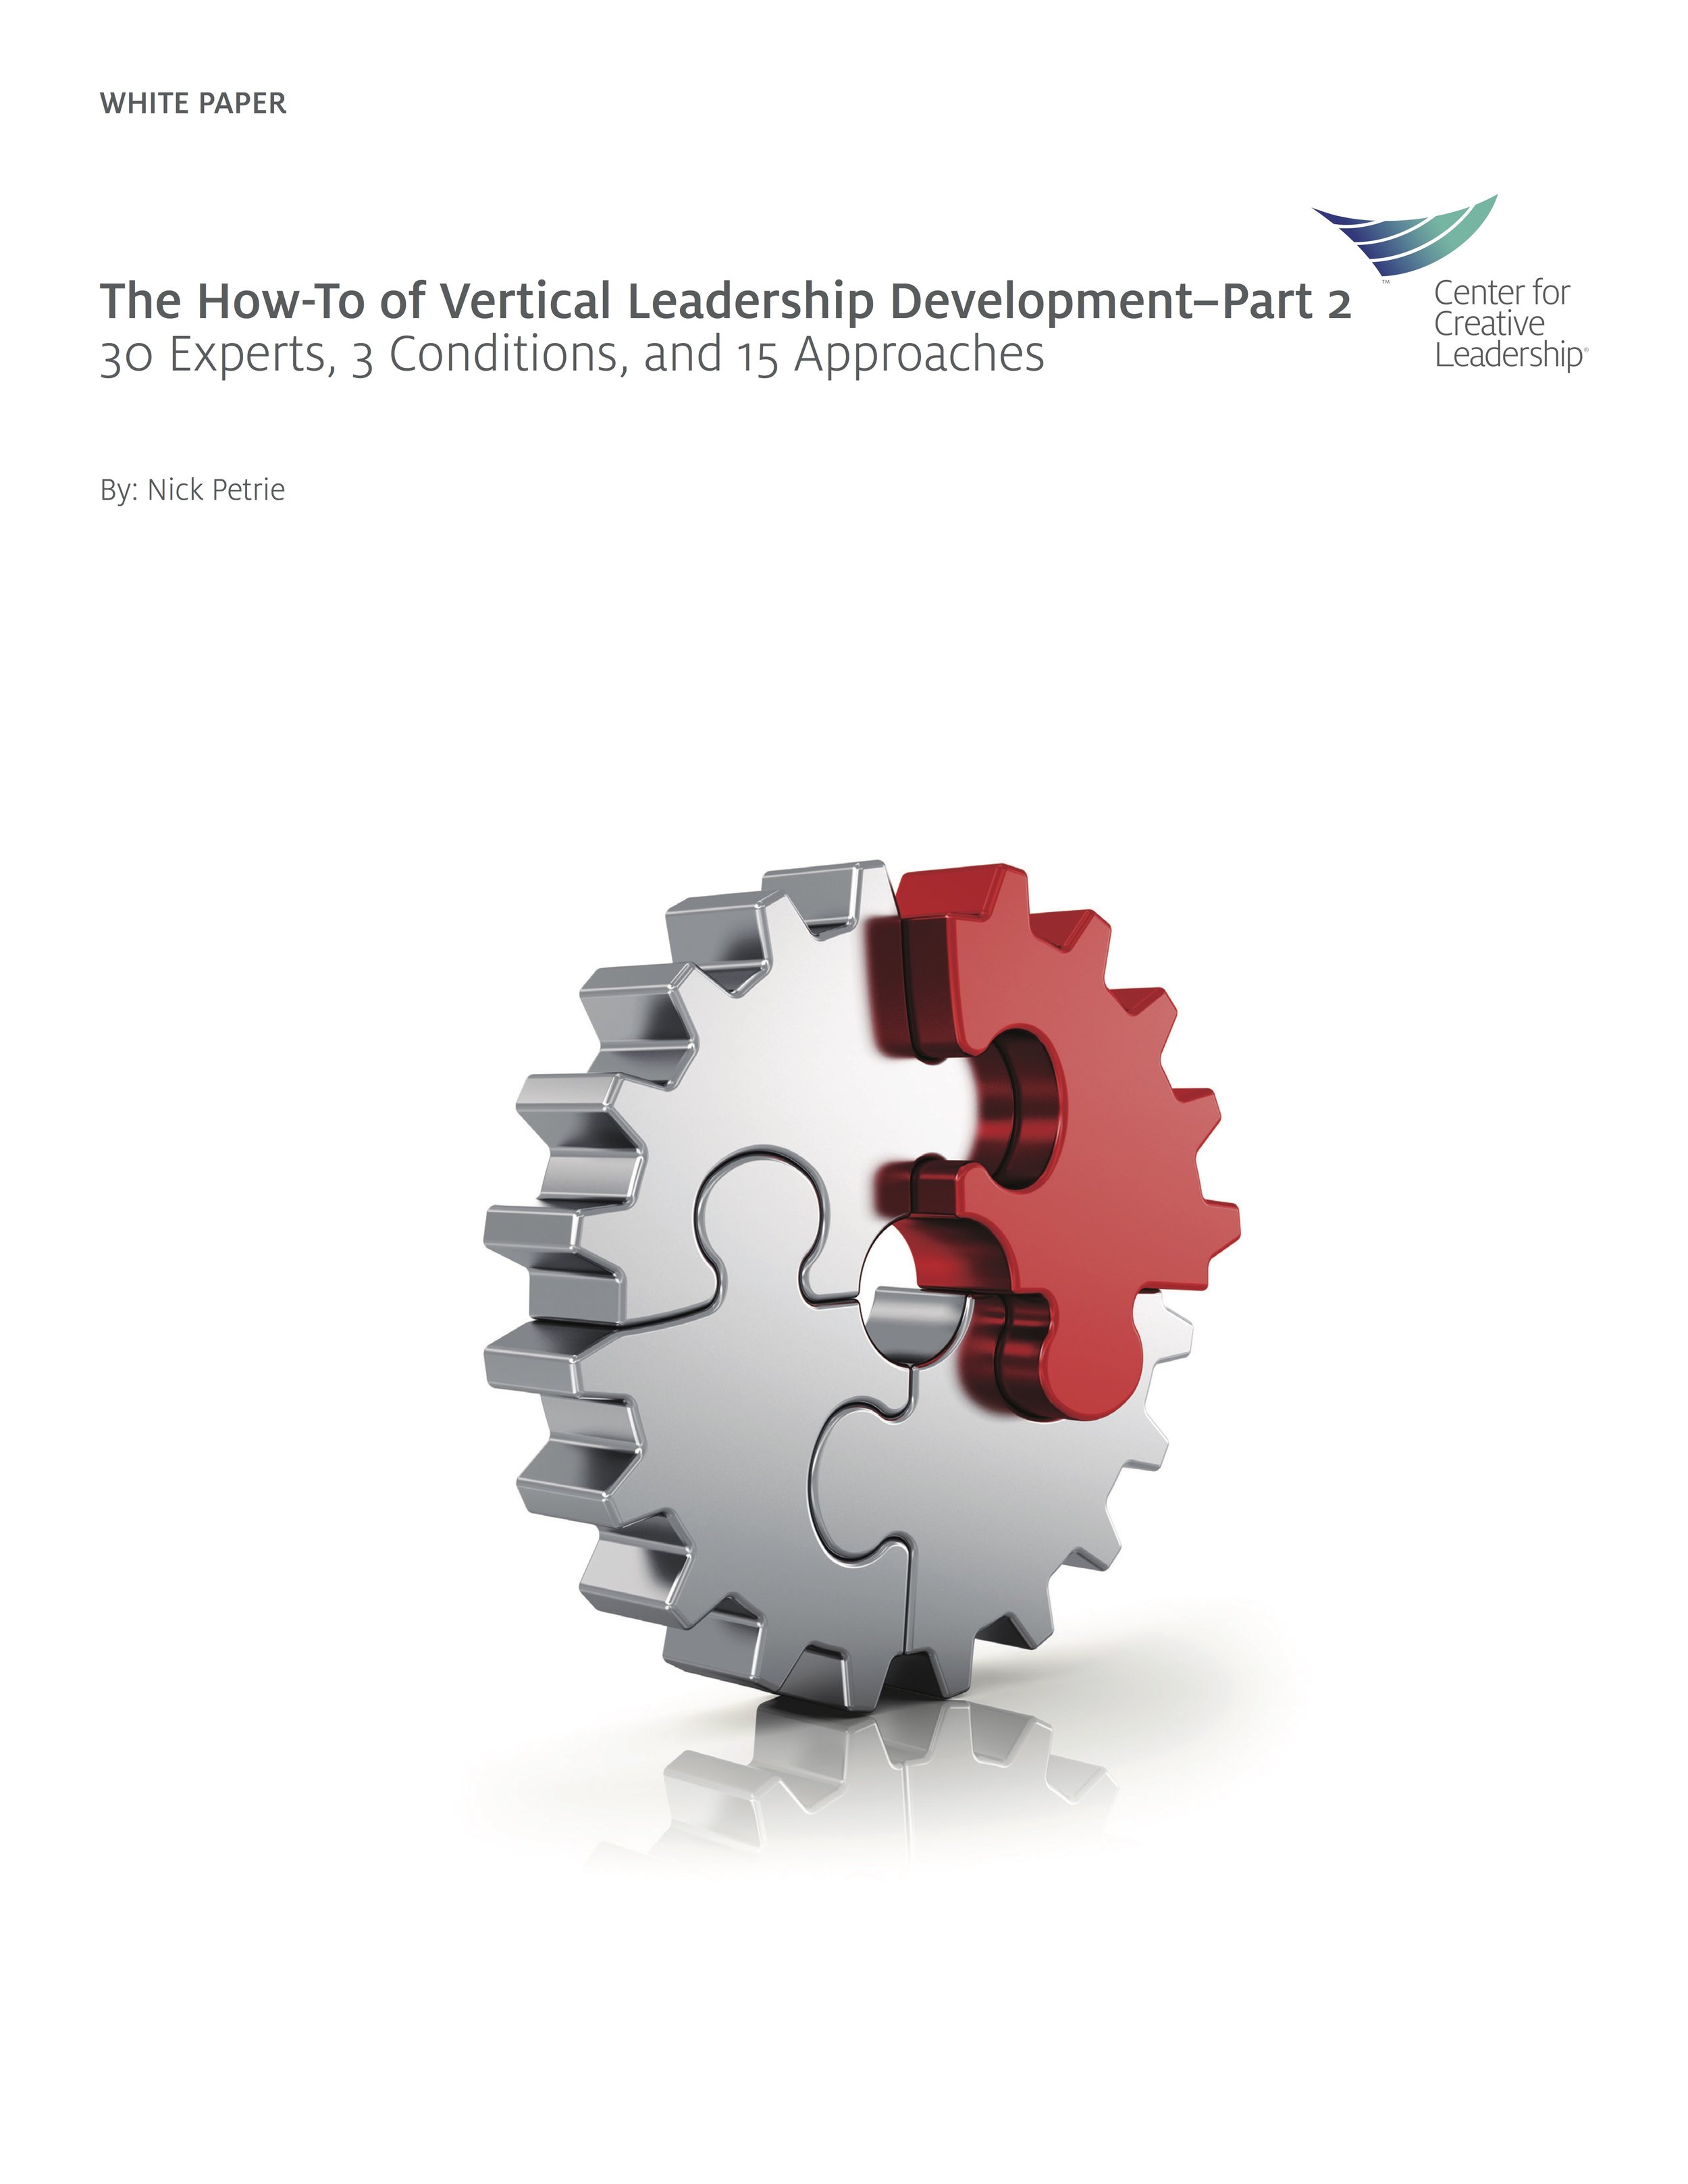 The "HOW TO" Vertical Development 